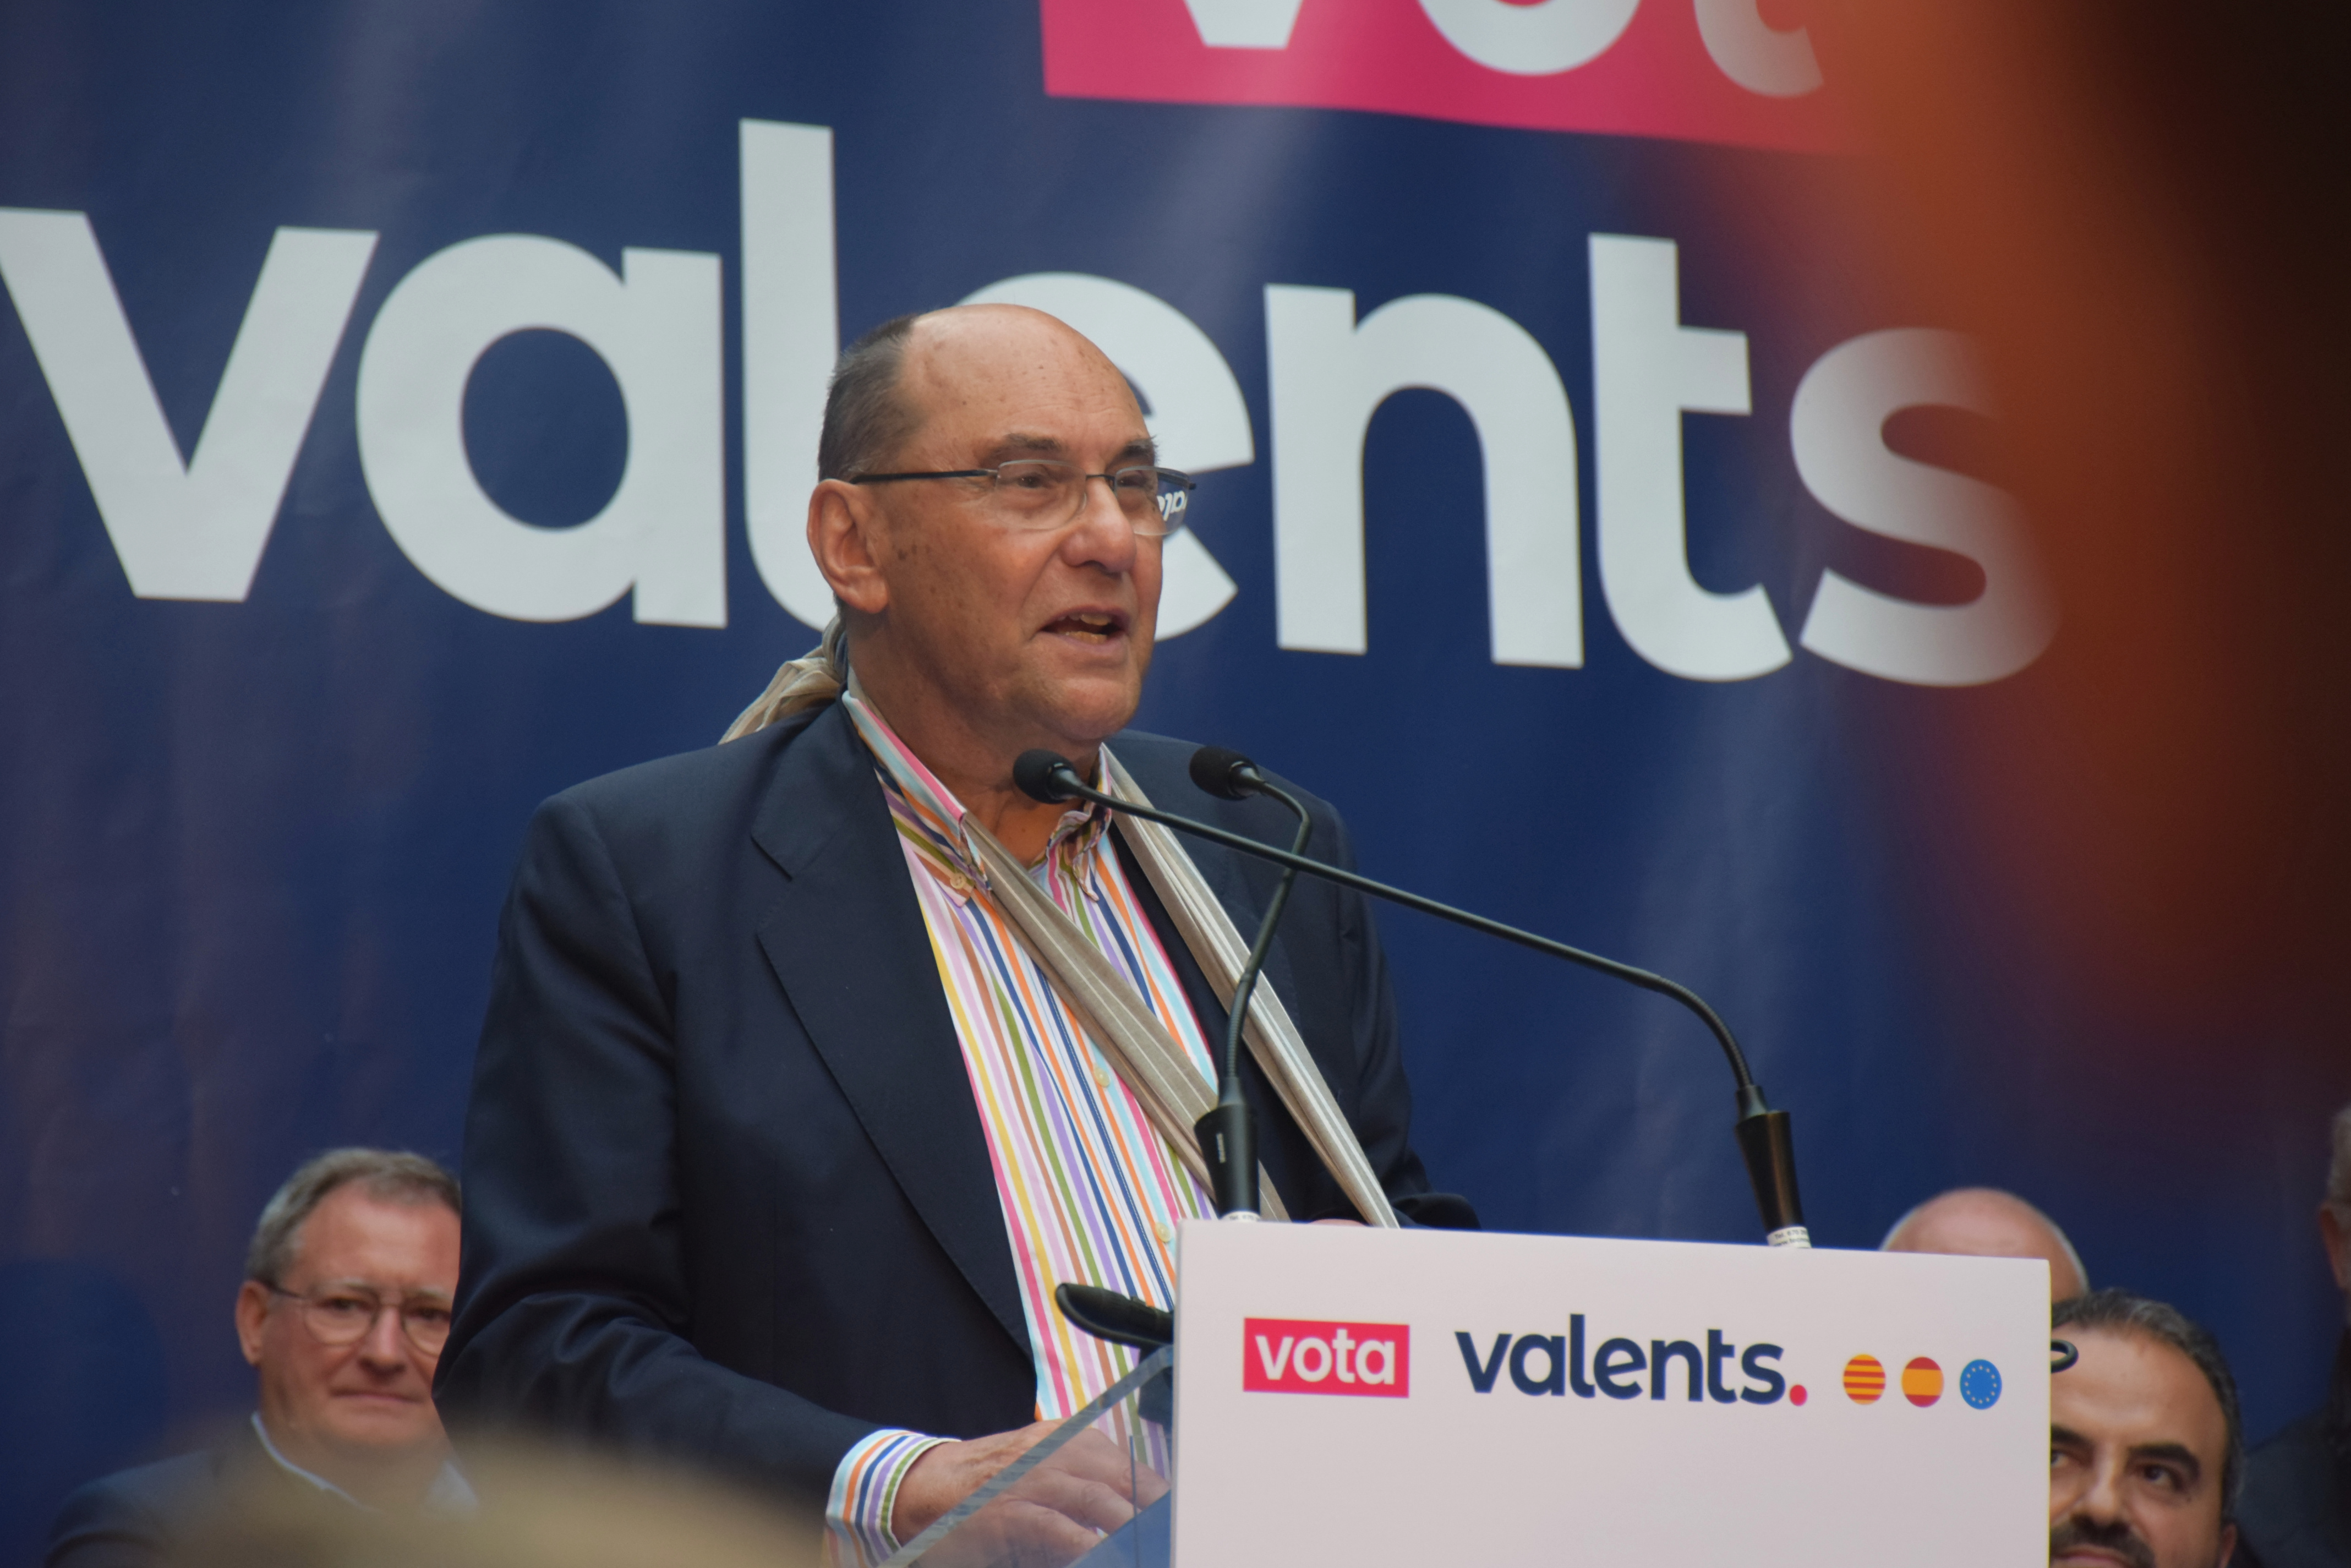 Former Catalonia's People's Party president and founder of far-right Vox, Alejo Vidal-Quadras, during a right-wing Valents party campaign event in Barcelona